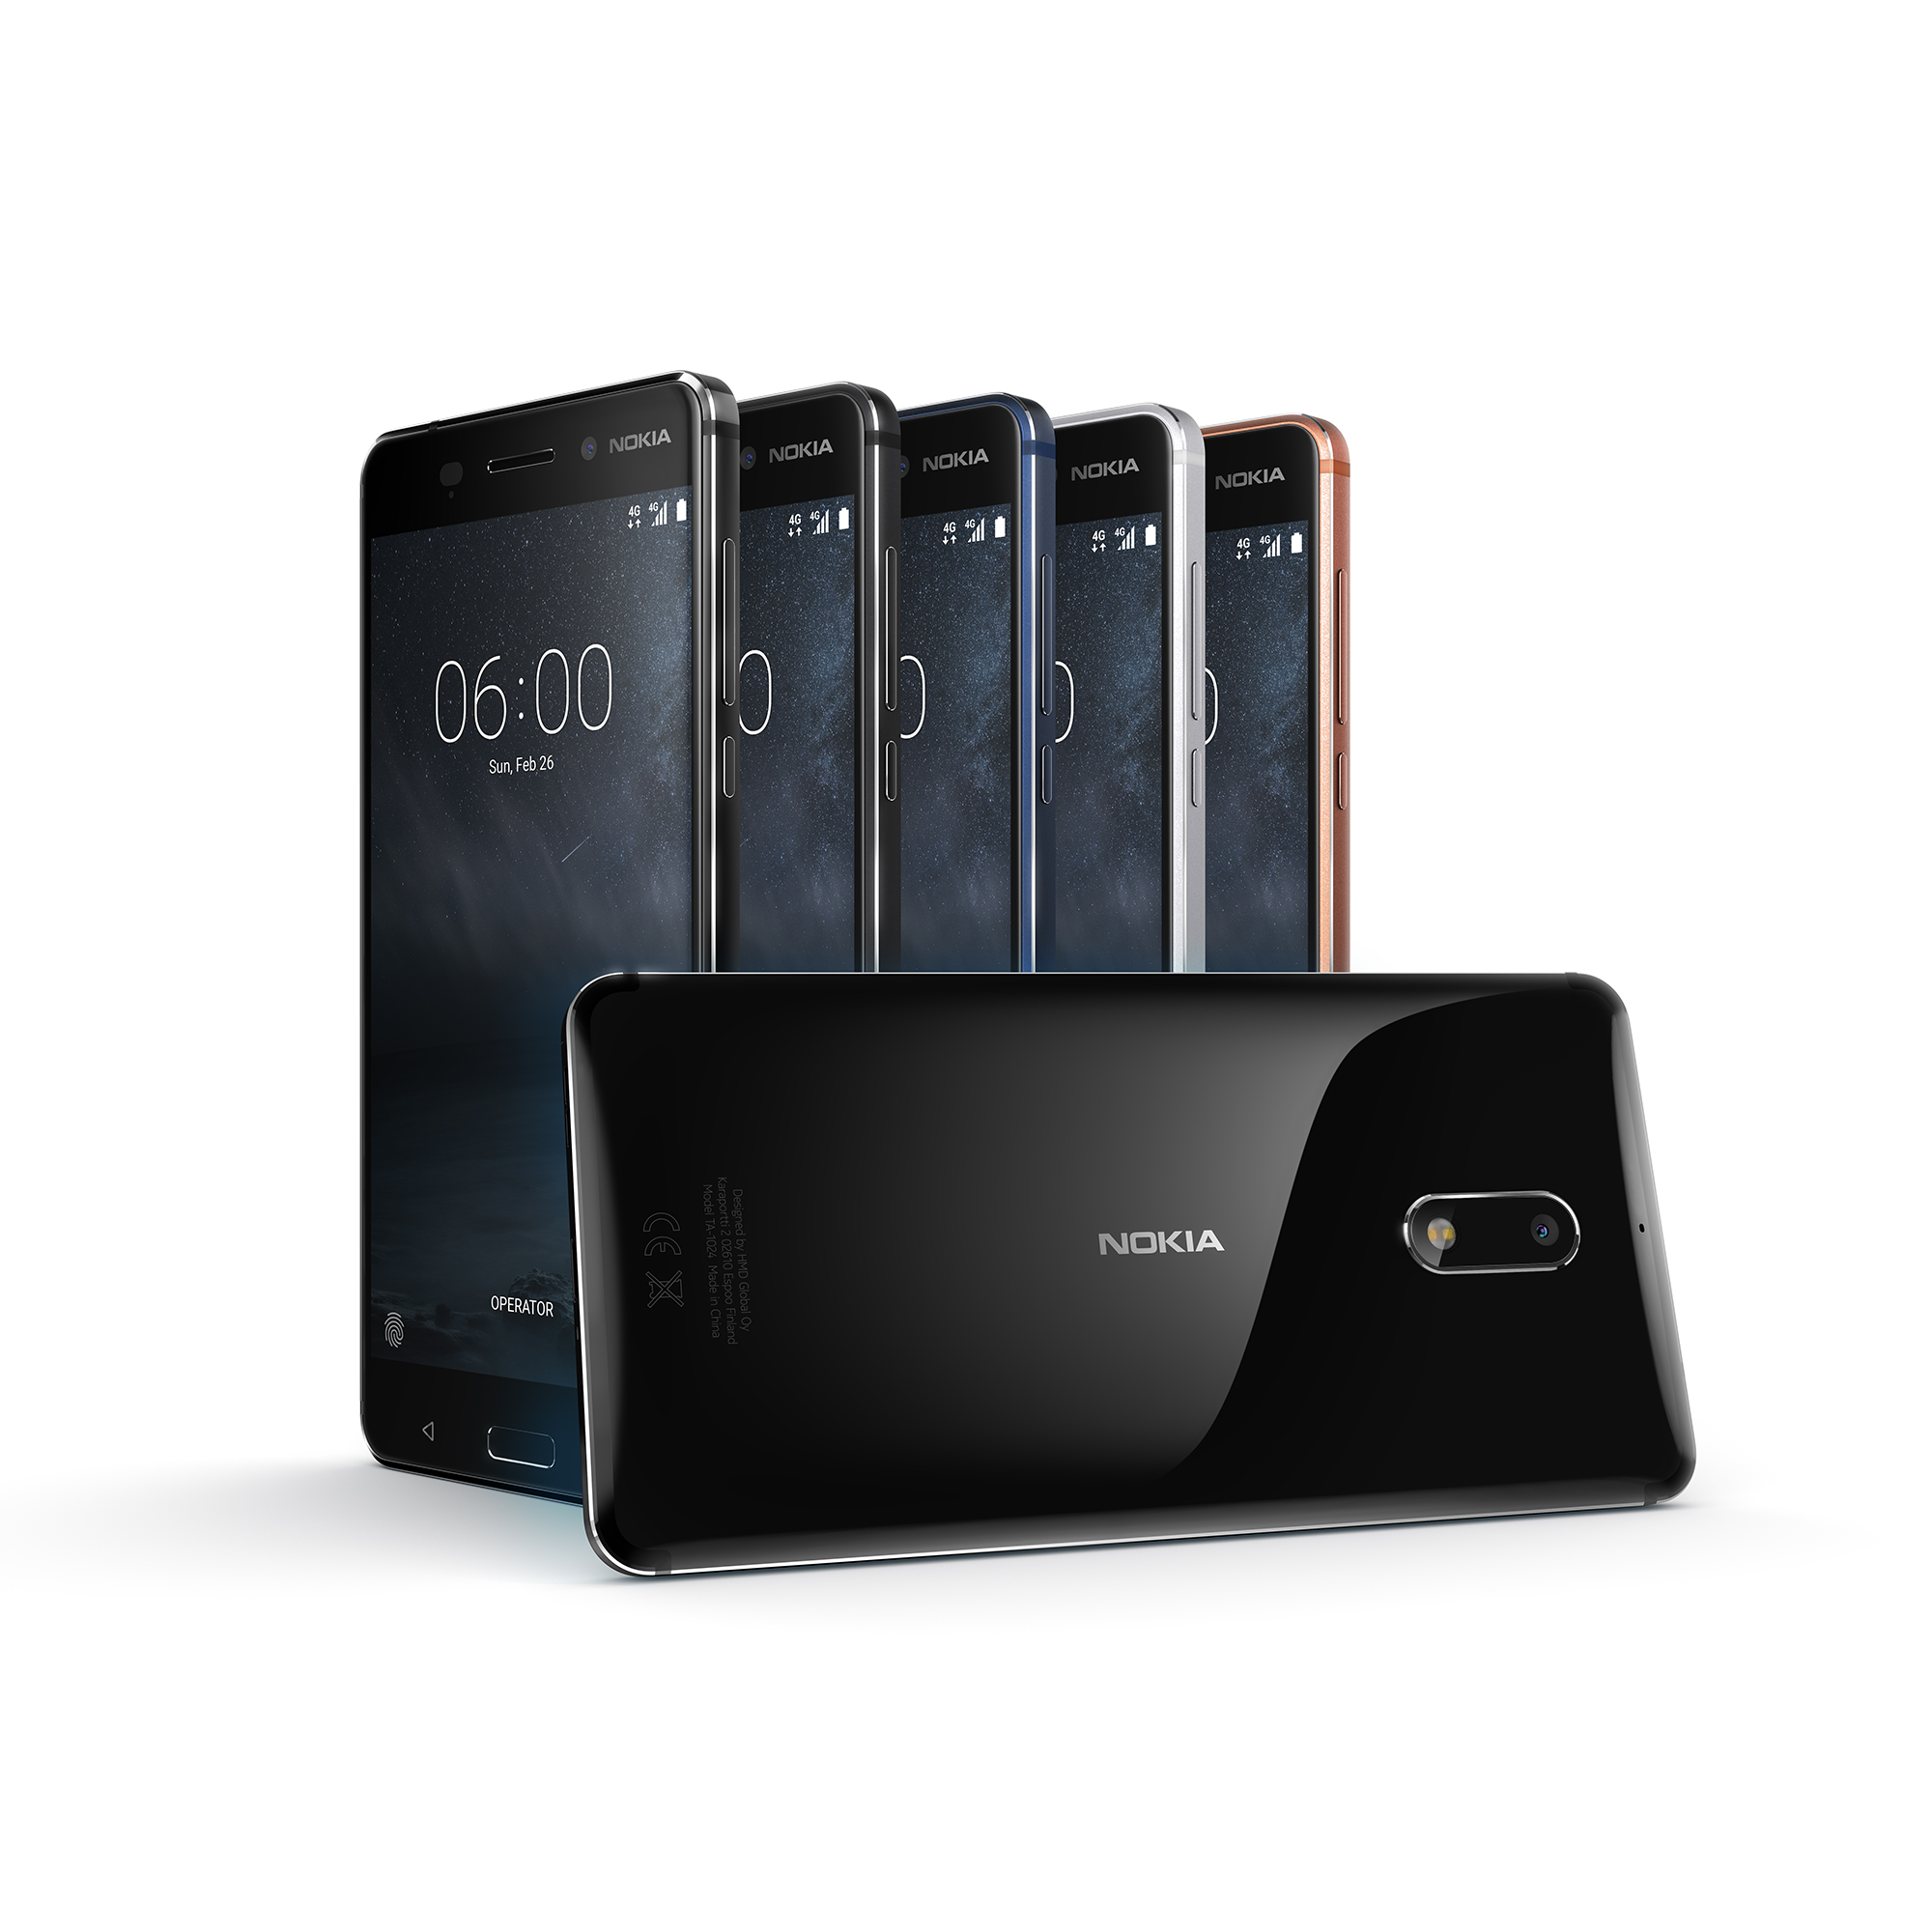 MWC 2017: Nokia 6 Makes Its Global Debut with Three New Phones